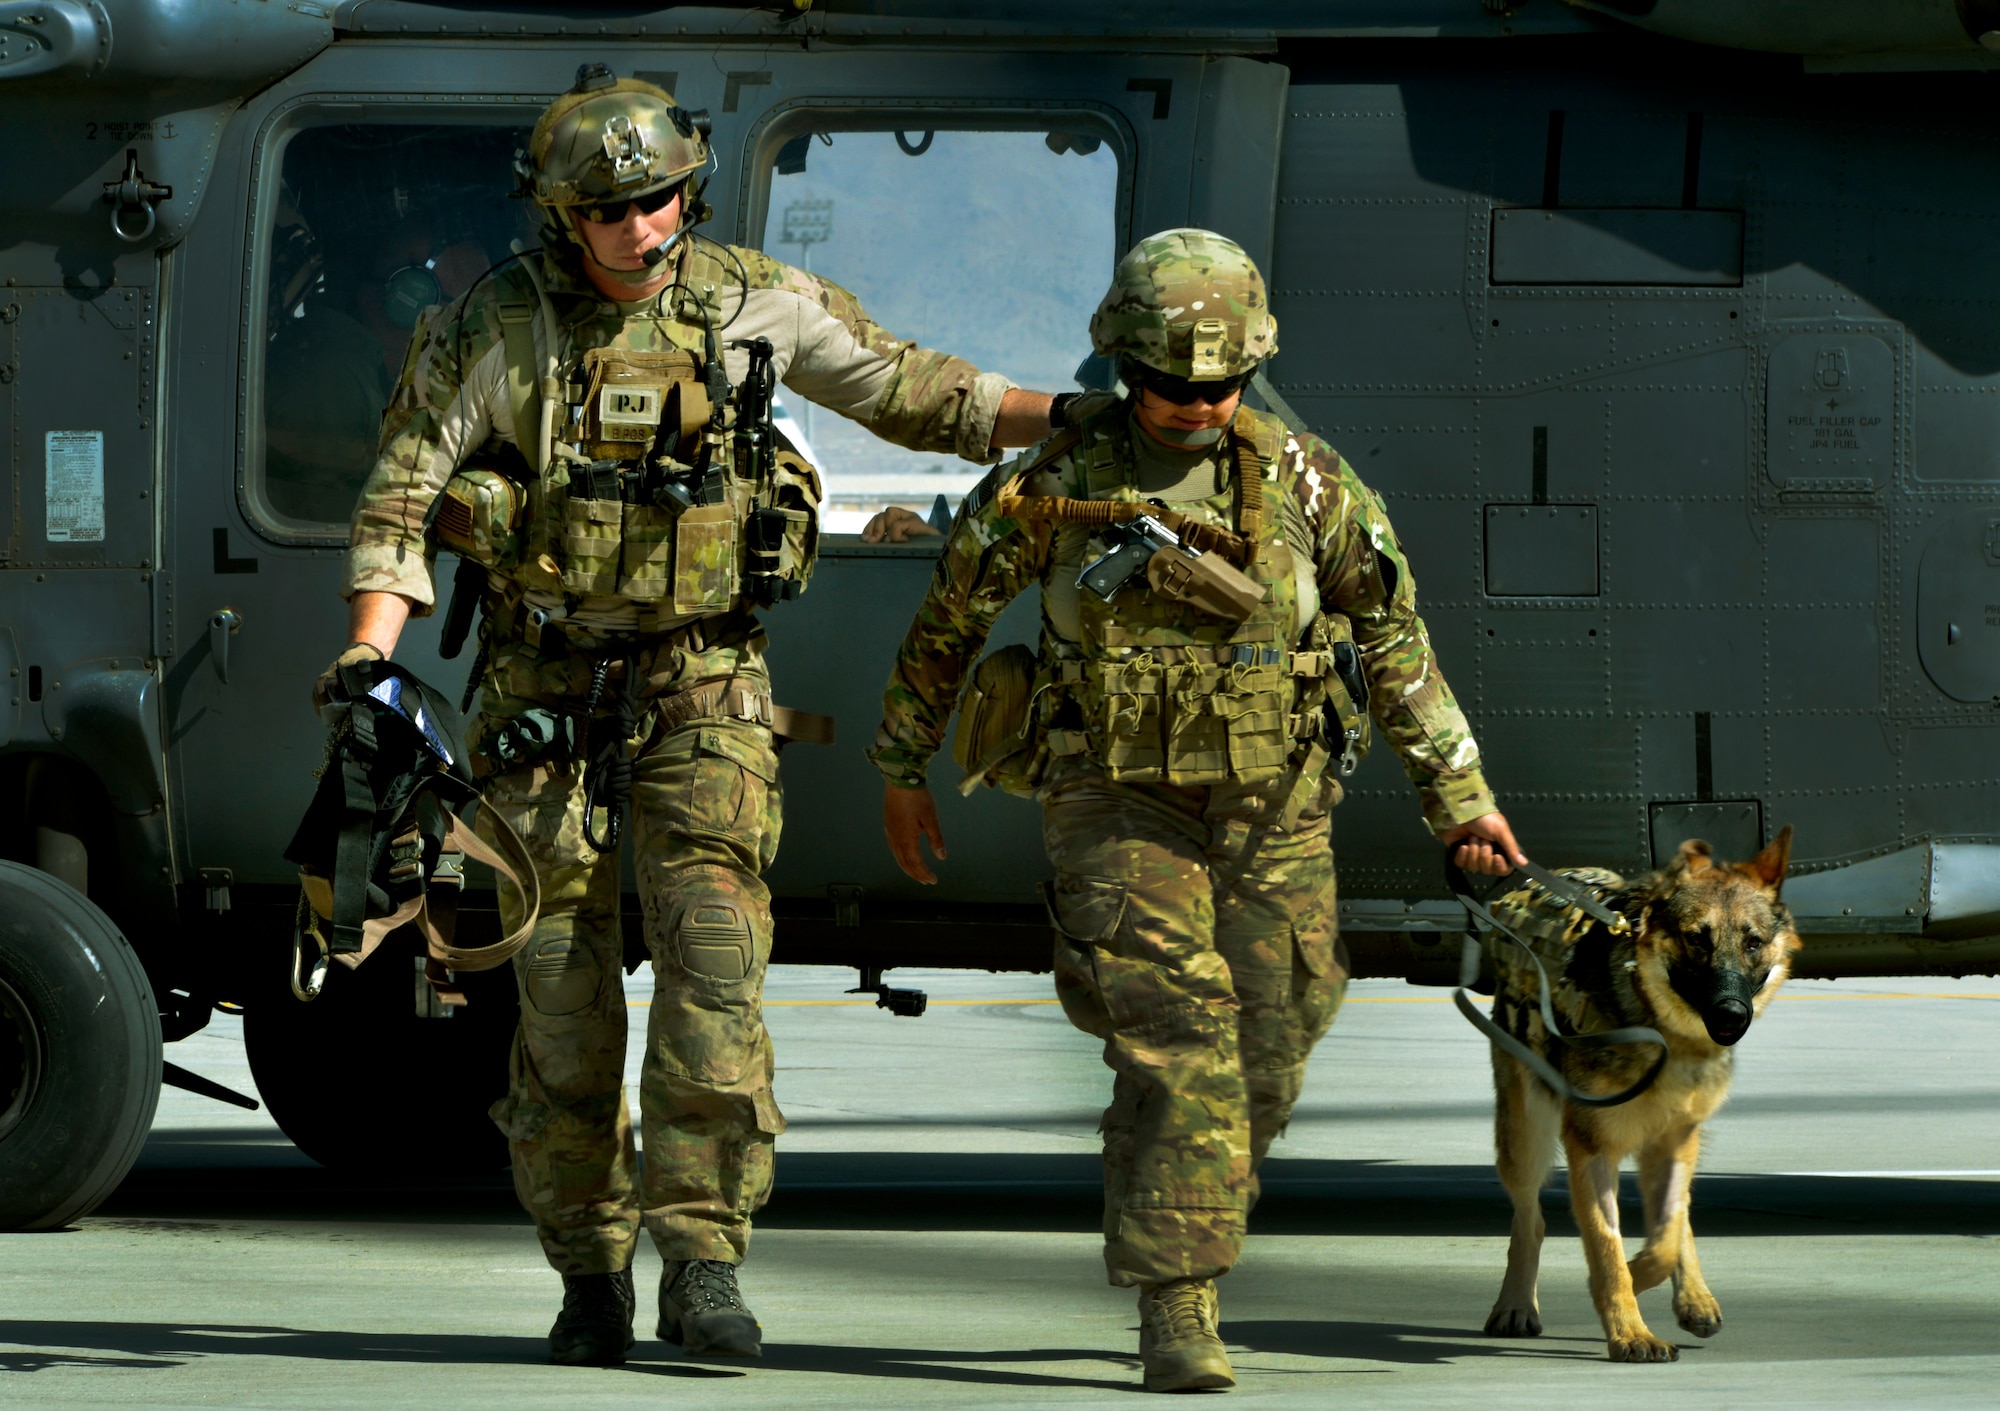 Senior Airman Jason Fischman, 83rd Expeditionary Rescue Squadron pararescueman, U.S. Army Sergeant Nina Alero, tactical explosive detection dog handler and her dog Rex, step off a HH-60G Pave Hawk helicopter during rescue training at Bagram Airfield, Afghanistan, June 21.  This training was a first for both branches and prepared them for future rescue missions. (U.S. Air Force photo/ Staff Sgt. Stephenie Wade) 